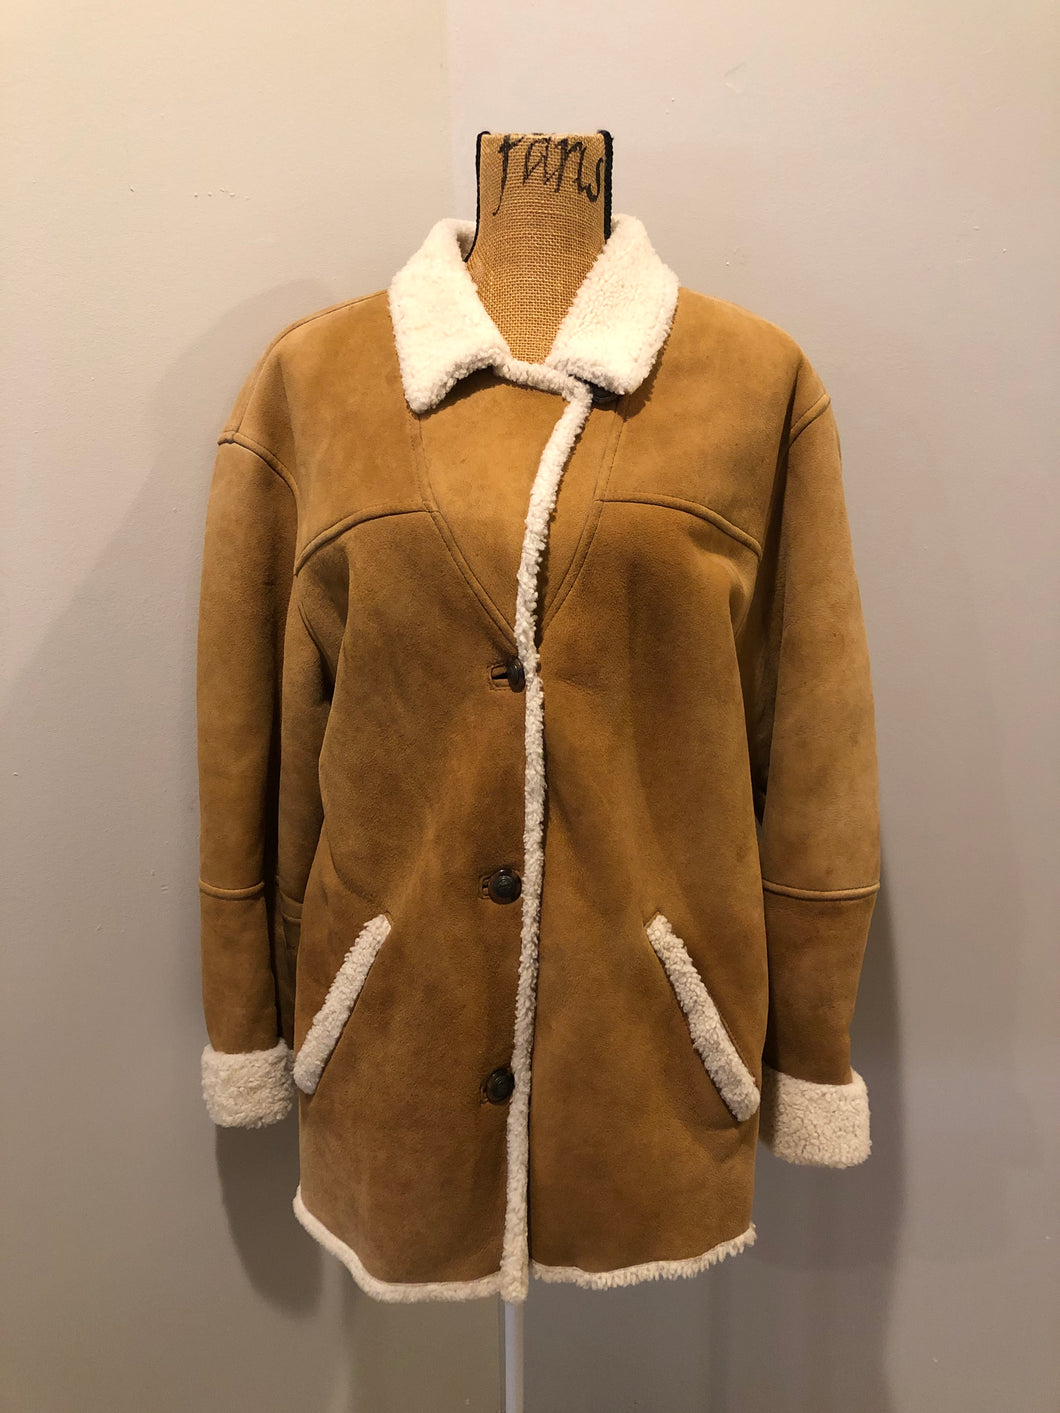 Kingspier Vintage - Timberland tan suede lambskin coat with shearling trim and lining, button closures and slash pockets. Coat is water resistant. Size medium.